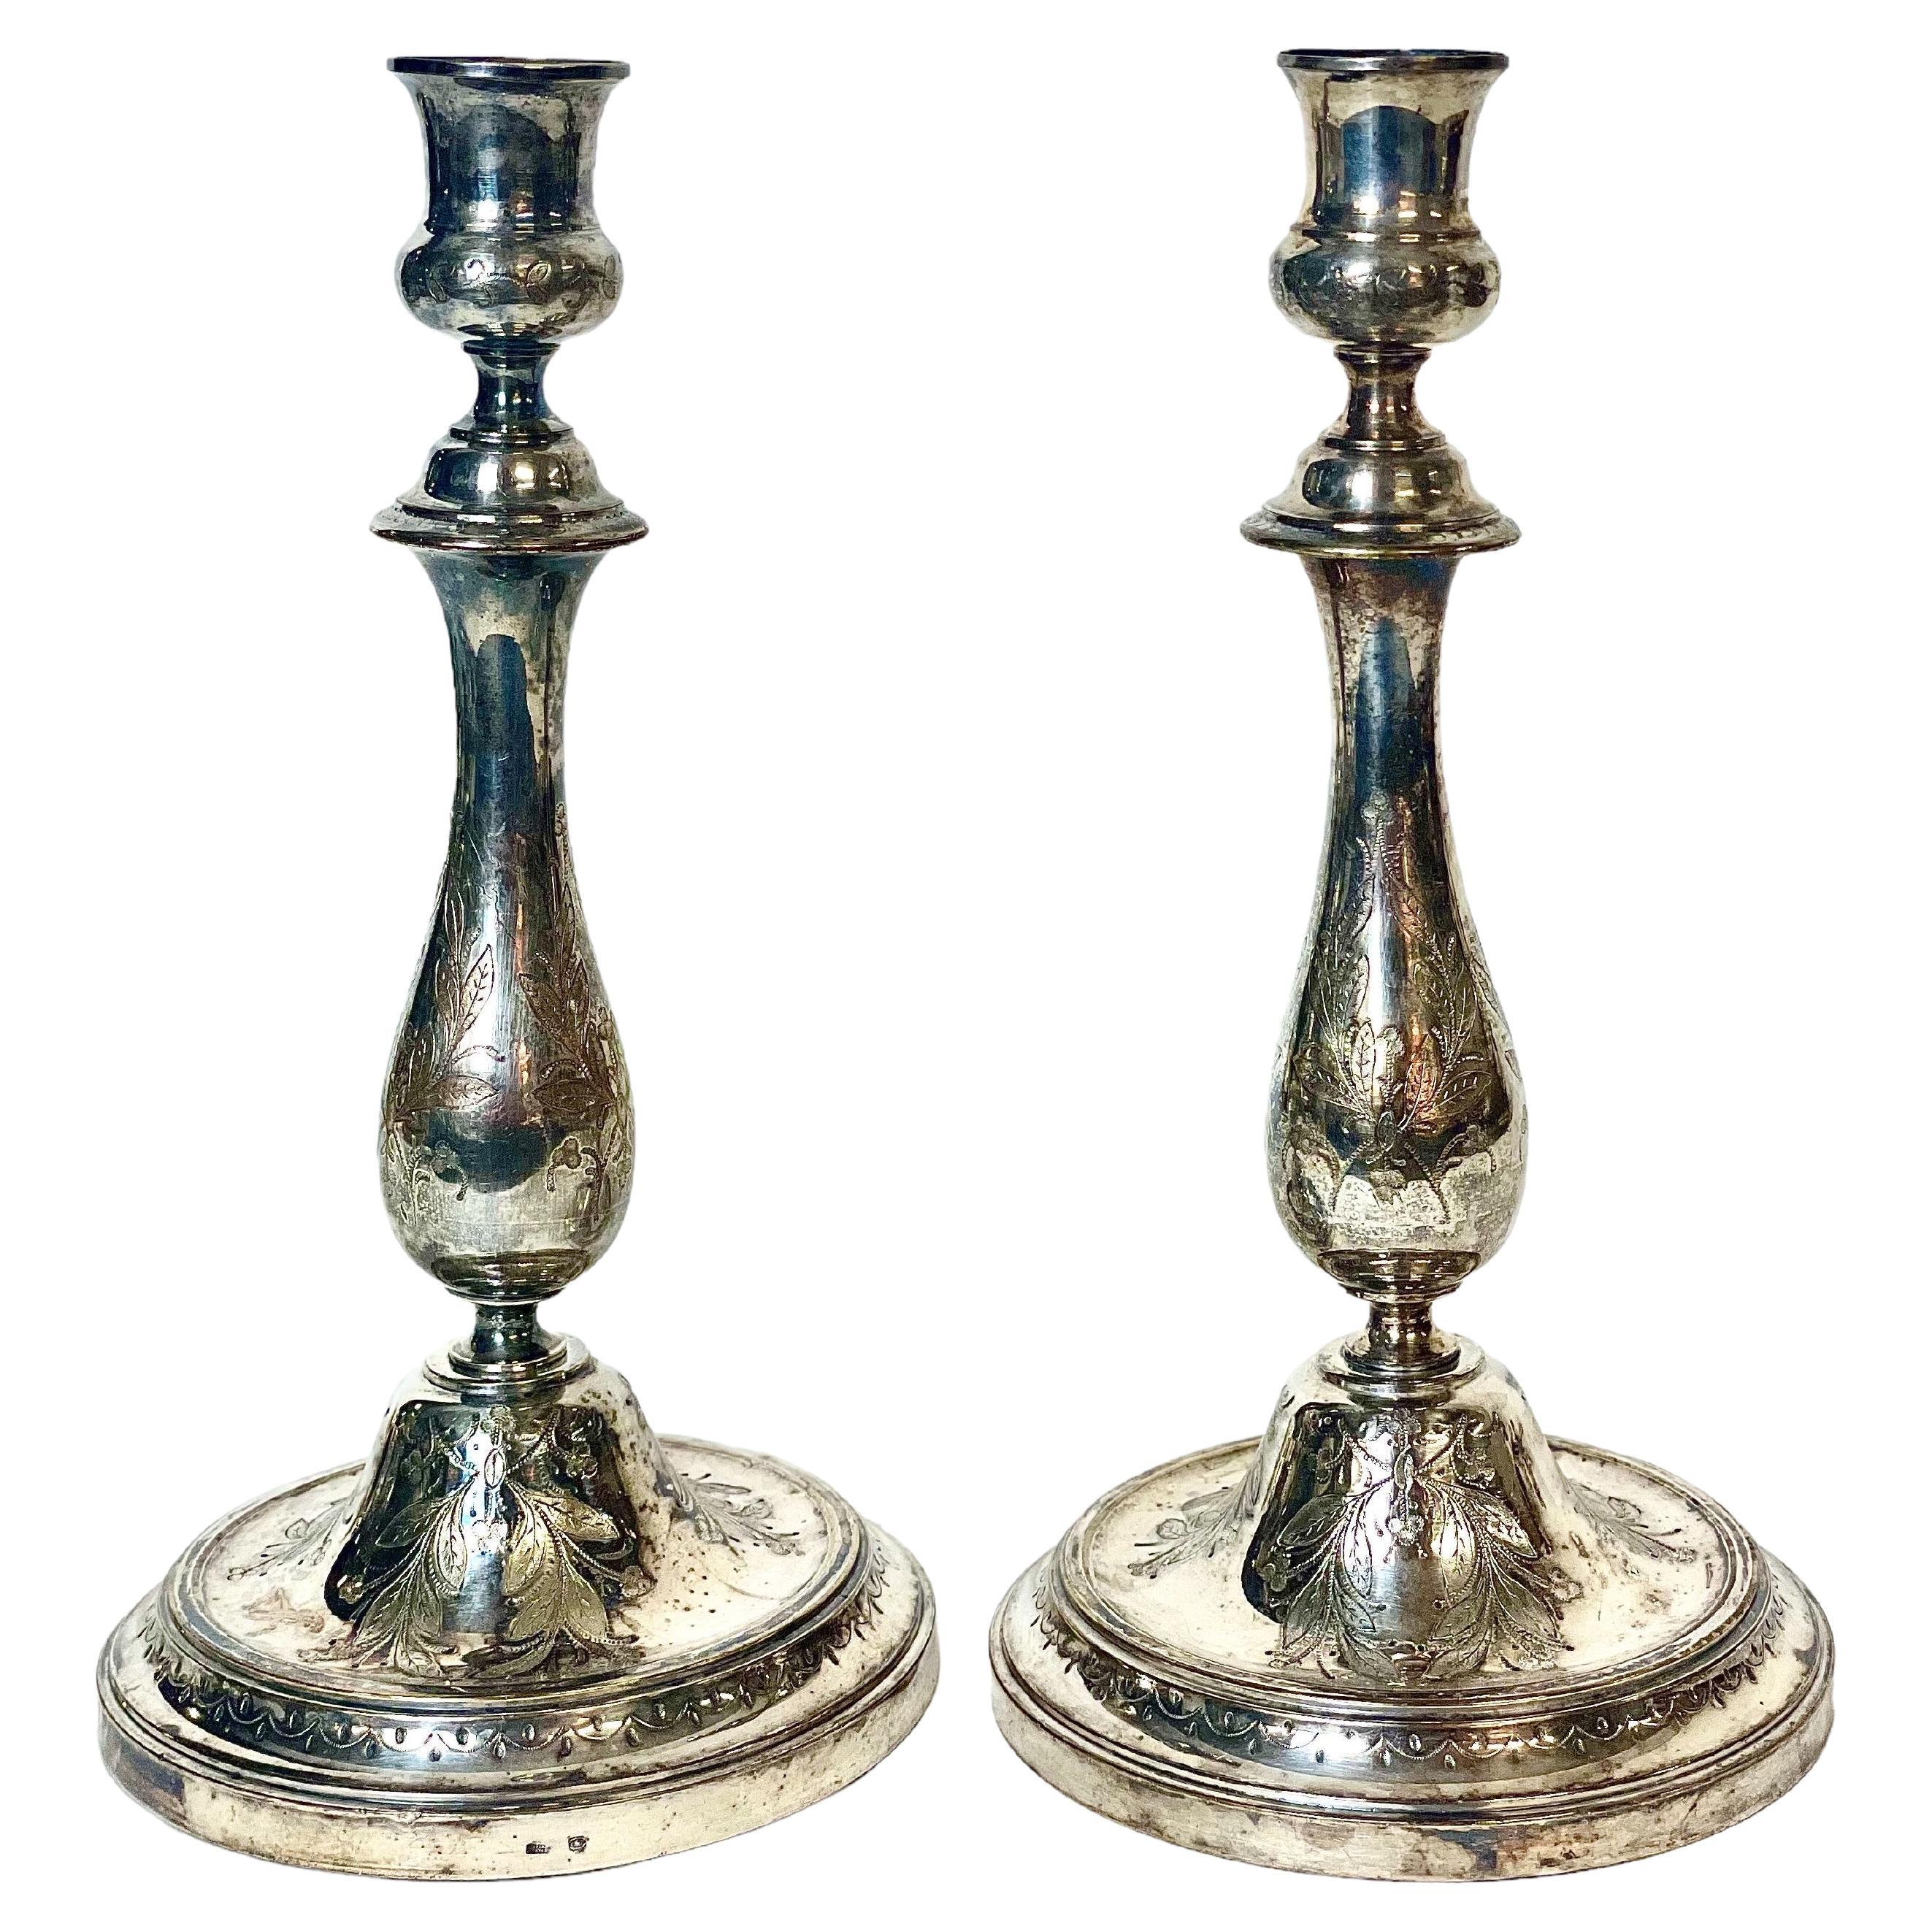 Pair of Parisian Engraved Silver Plated Candlestick Holders by Cailar Bayard For Sale